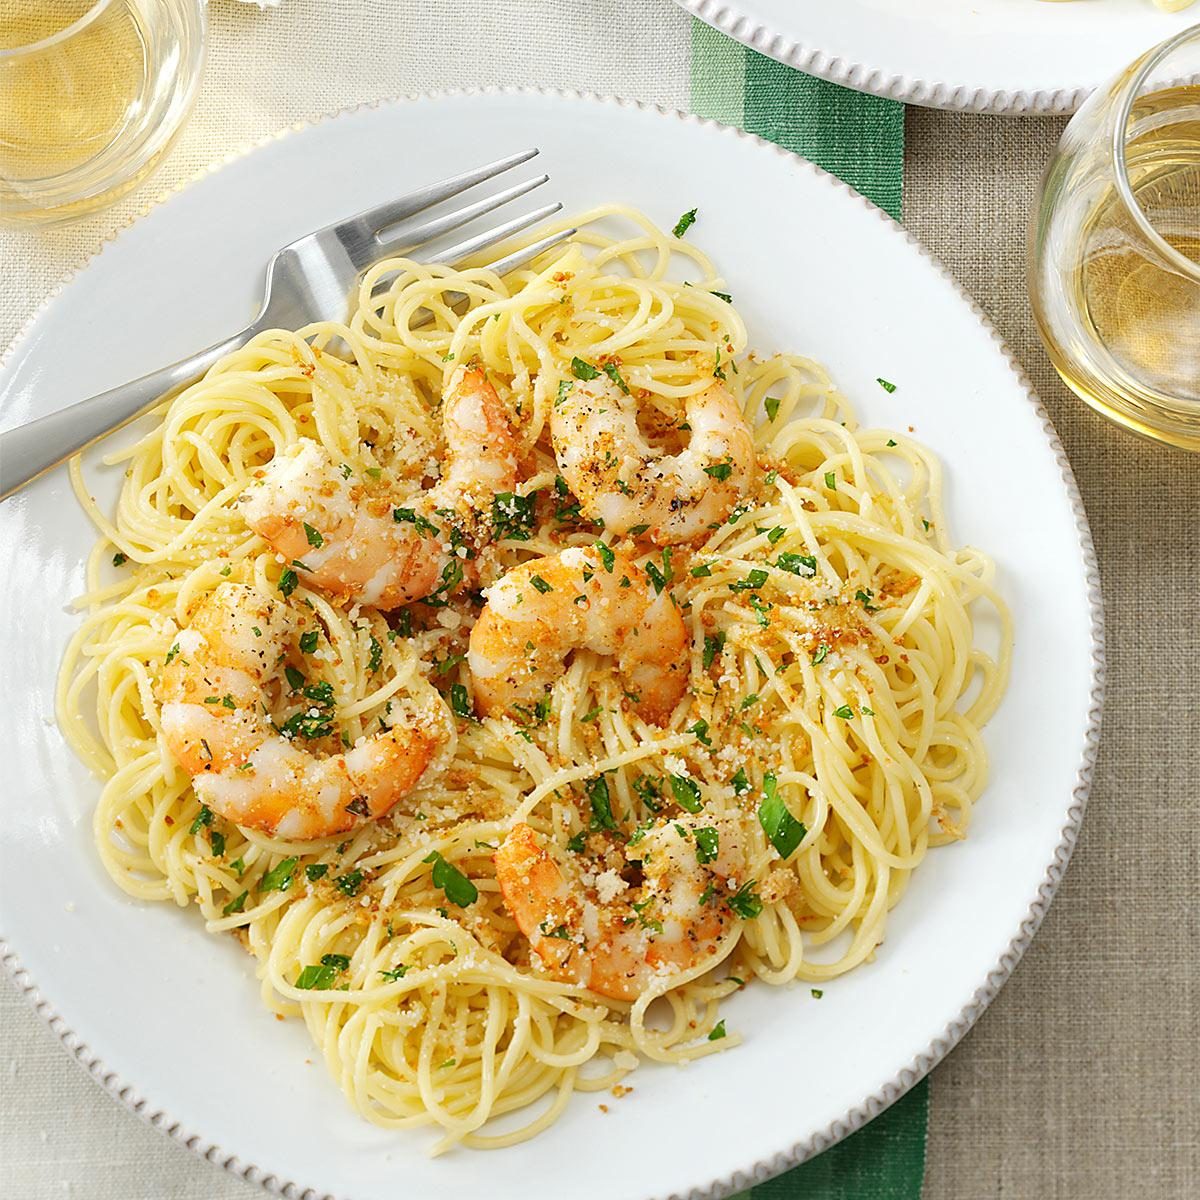 What is a good shrimp scampi recipe?